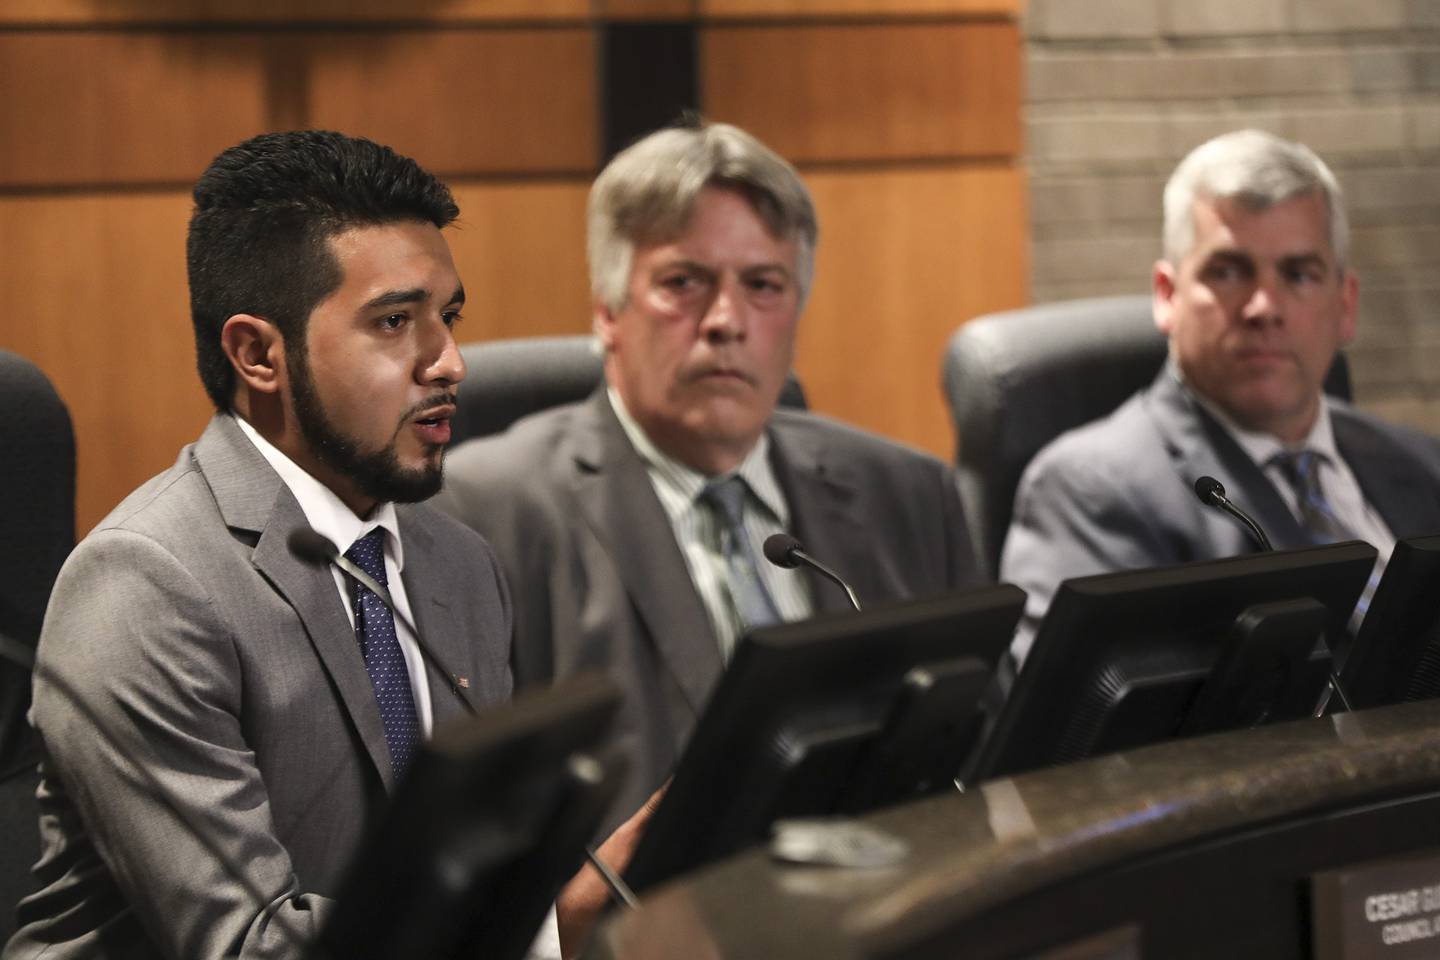 Cesar Guerrero addresses the council on Monday, May 3, 2021, at Joliet City Hall in Joliet, Ill. After a tight race, three new City Councilman were sworn in at a special meeting on Tuesday.